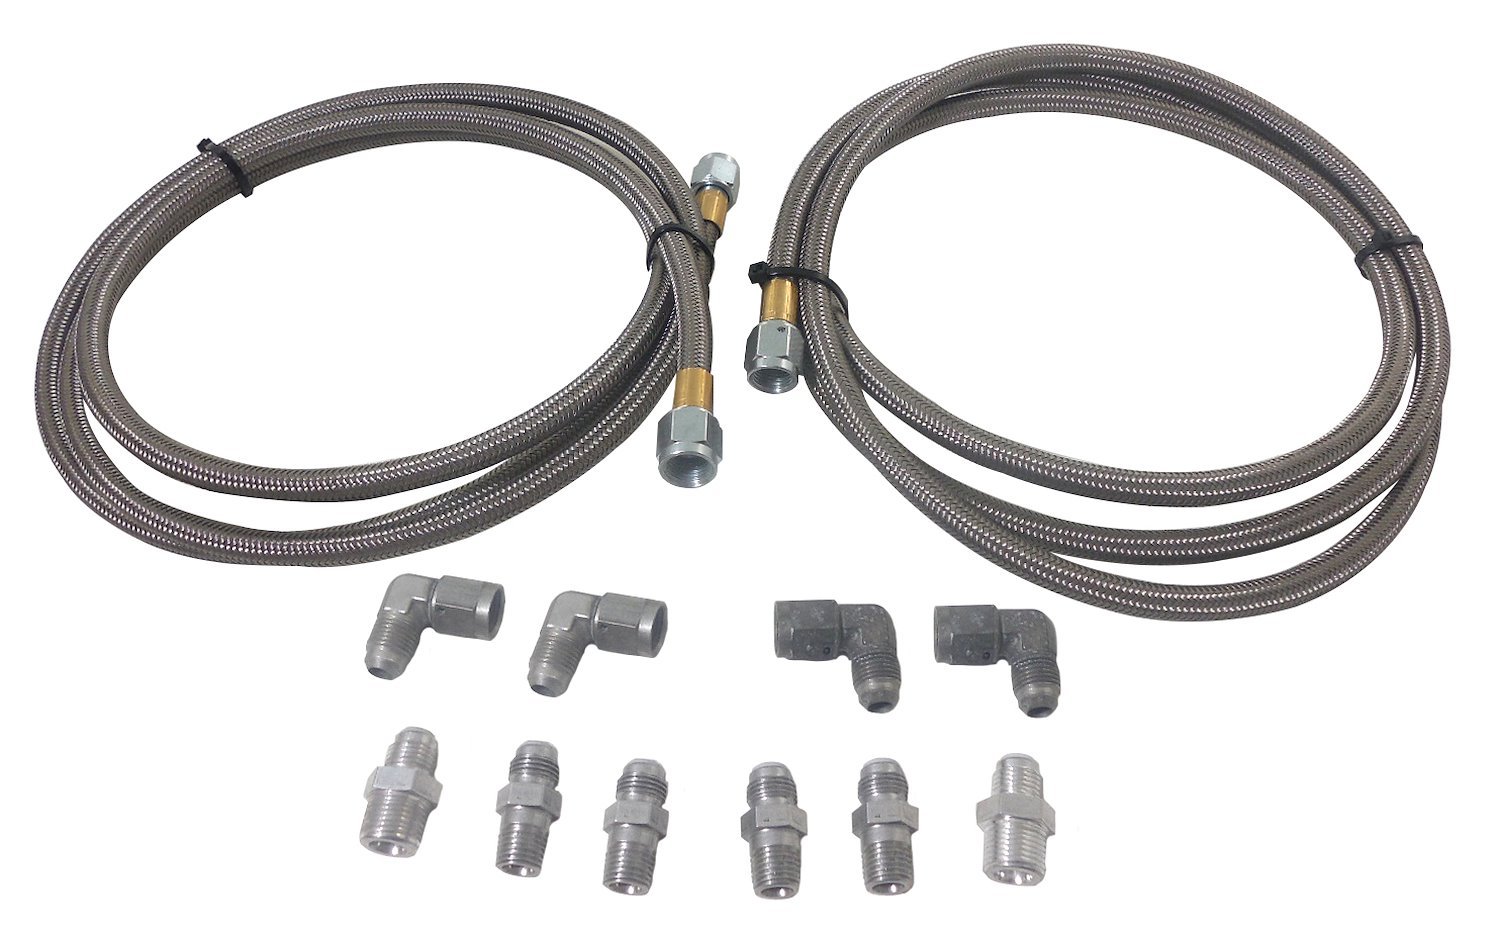 48 SINGLE AND DUAL TRANSMISSION COOLER HOSE KIT - FLEXIBLE STAINLESS STEEL